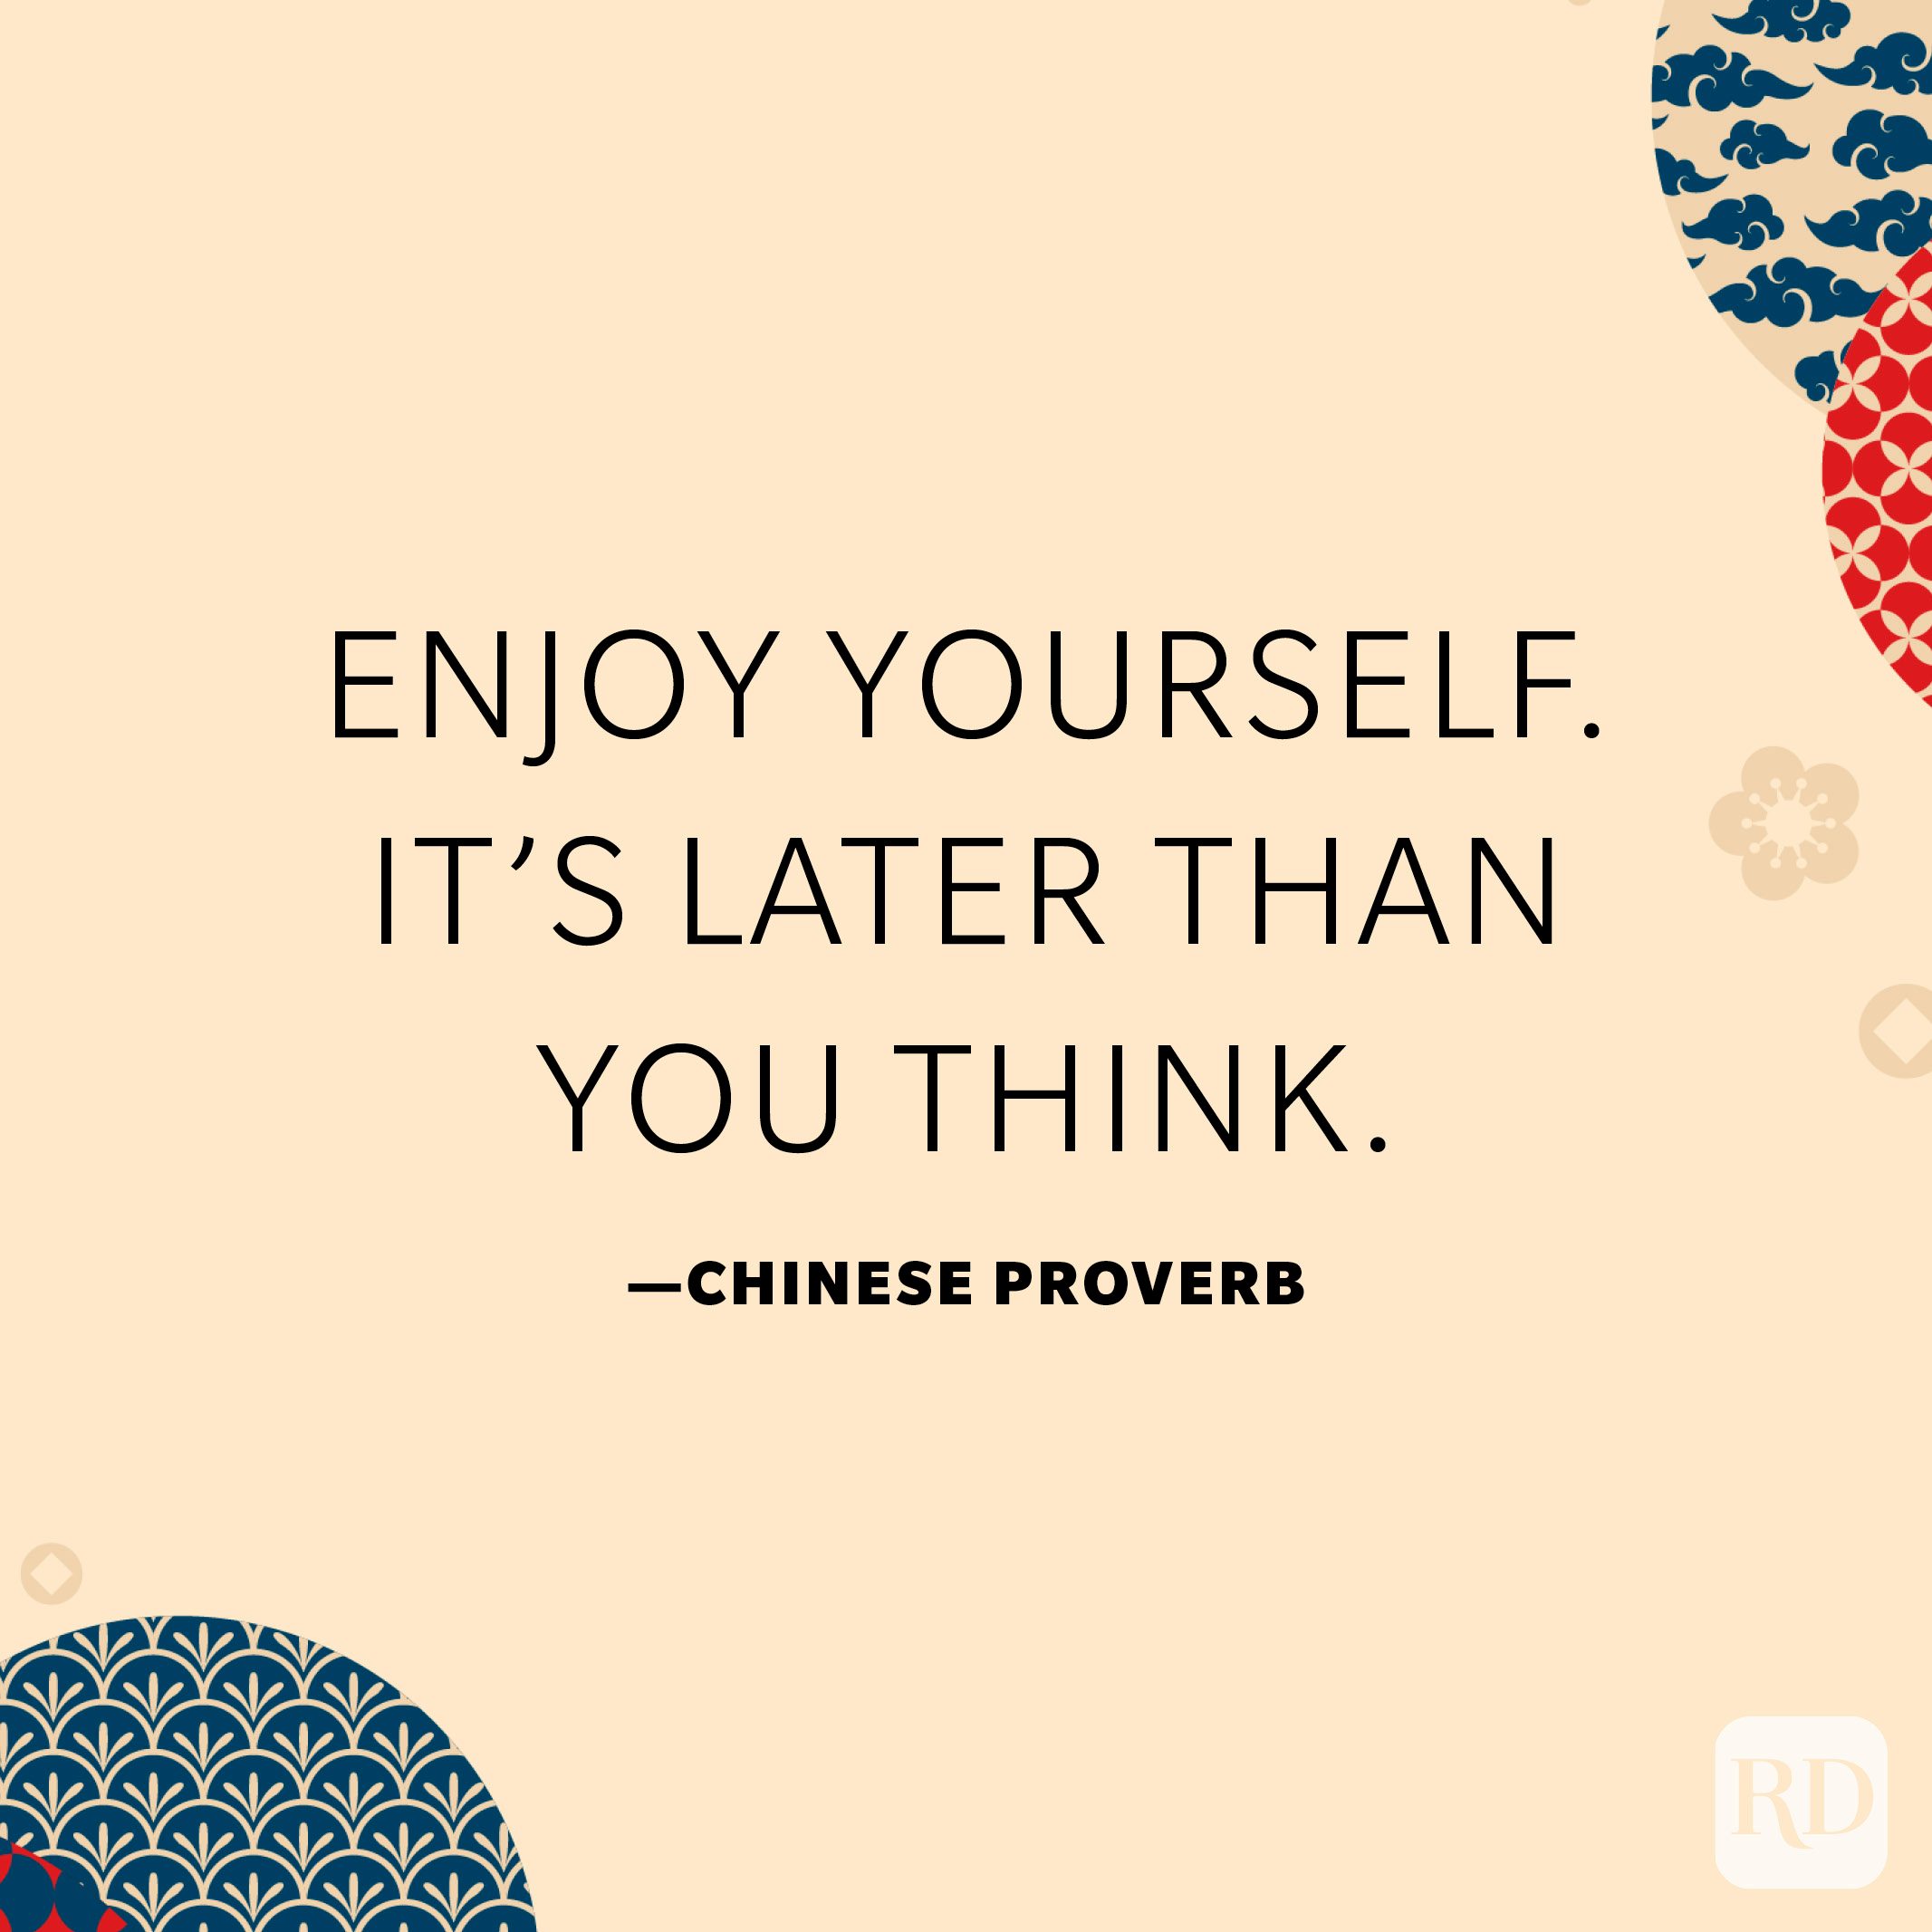 Enjoy yourself. It’s later than you think.